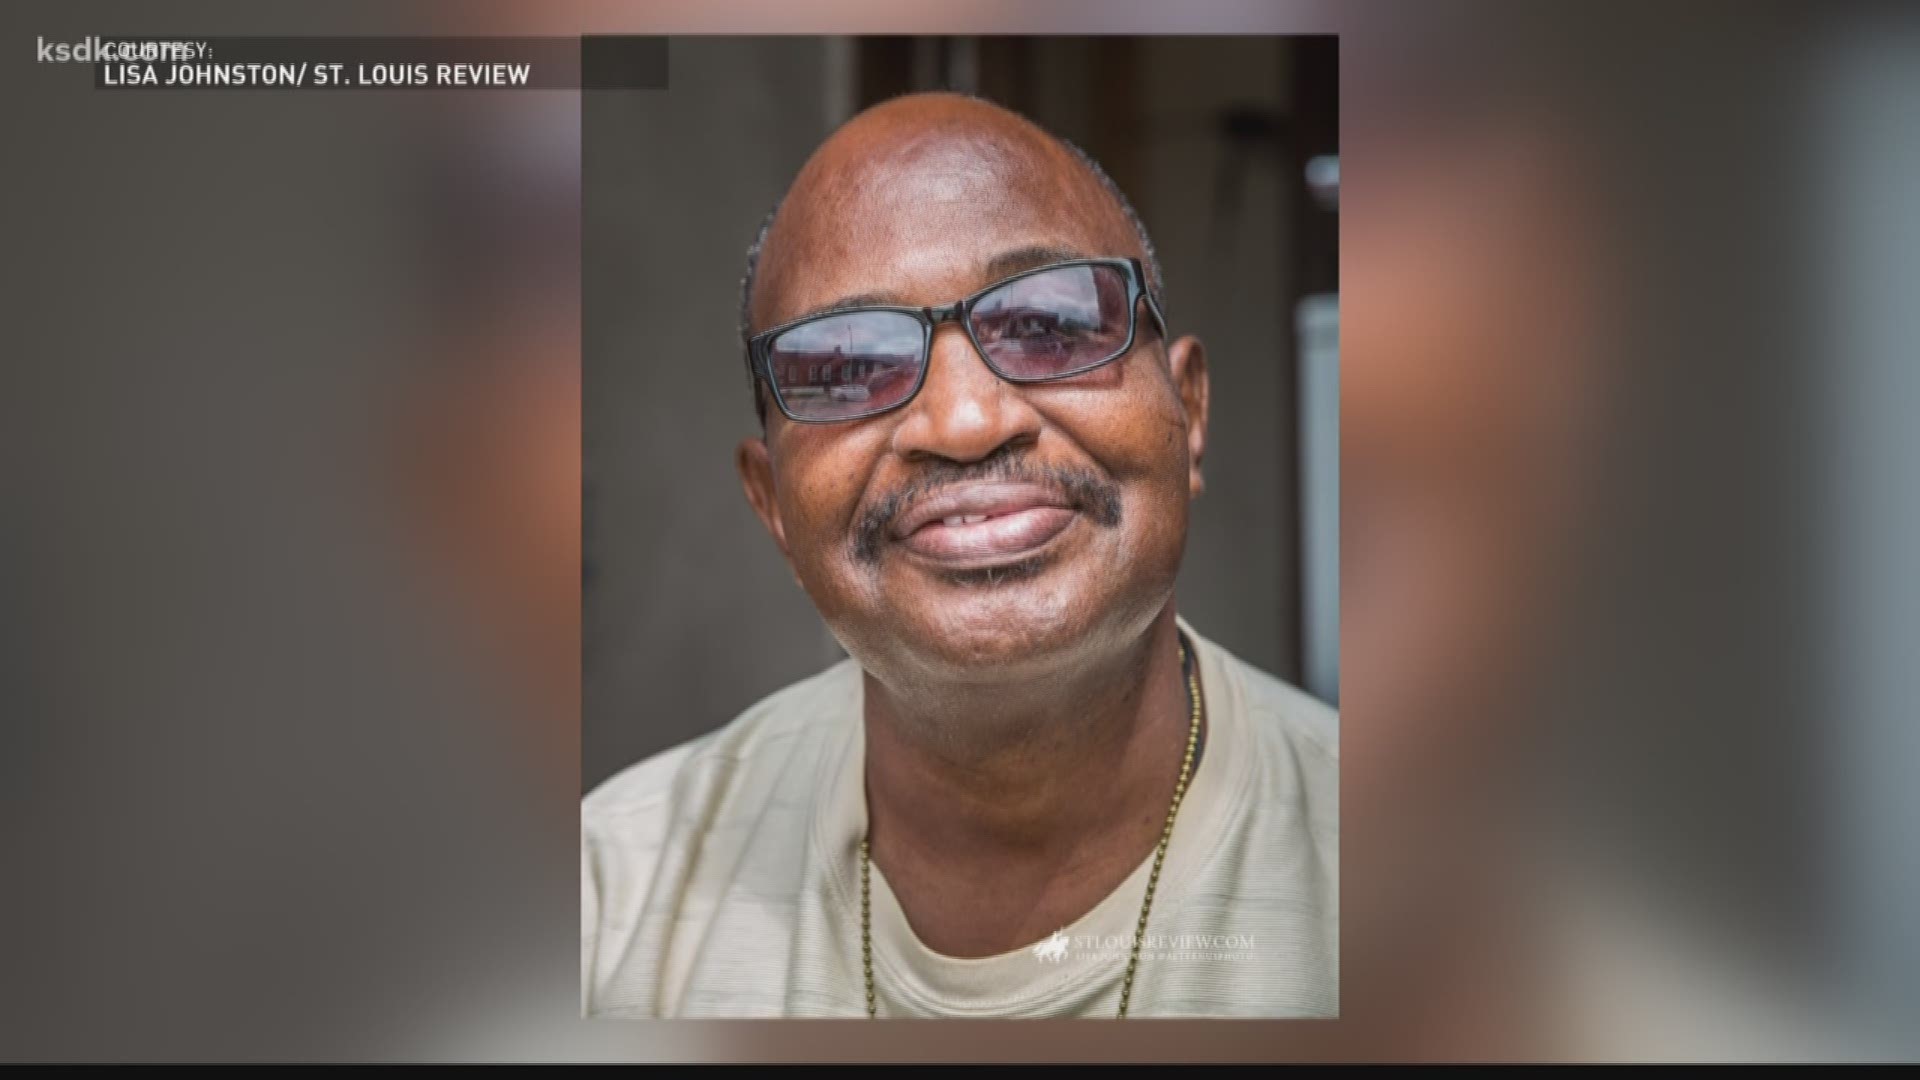 A 65-year-old man was murdered in a south St. Louis neighborhood early Sunday morning.